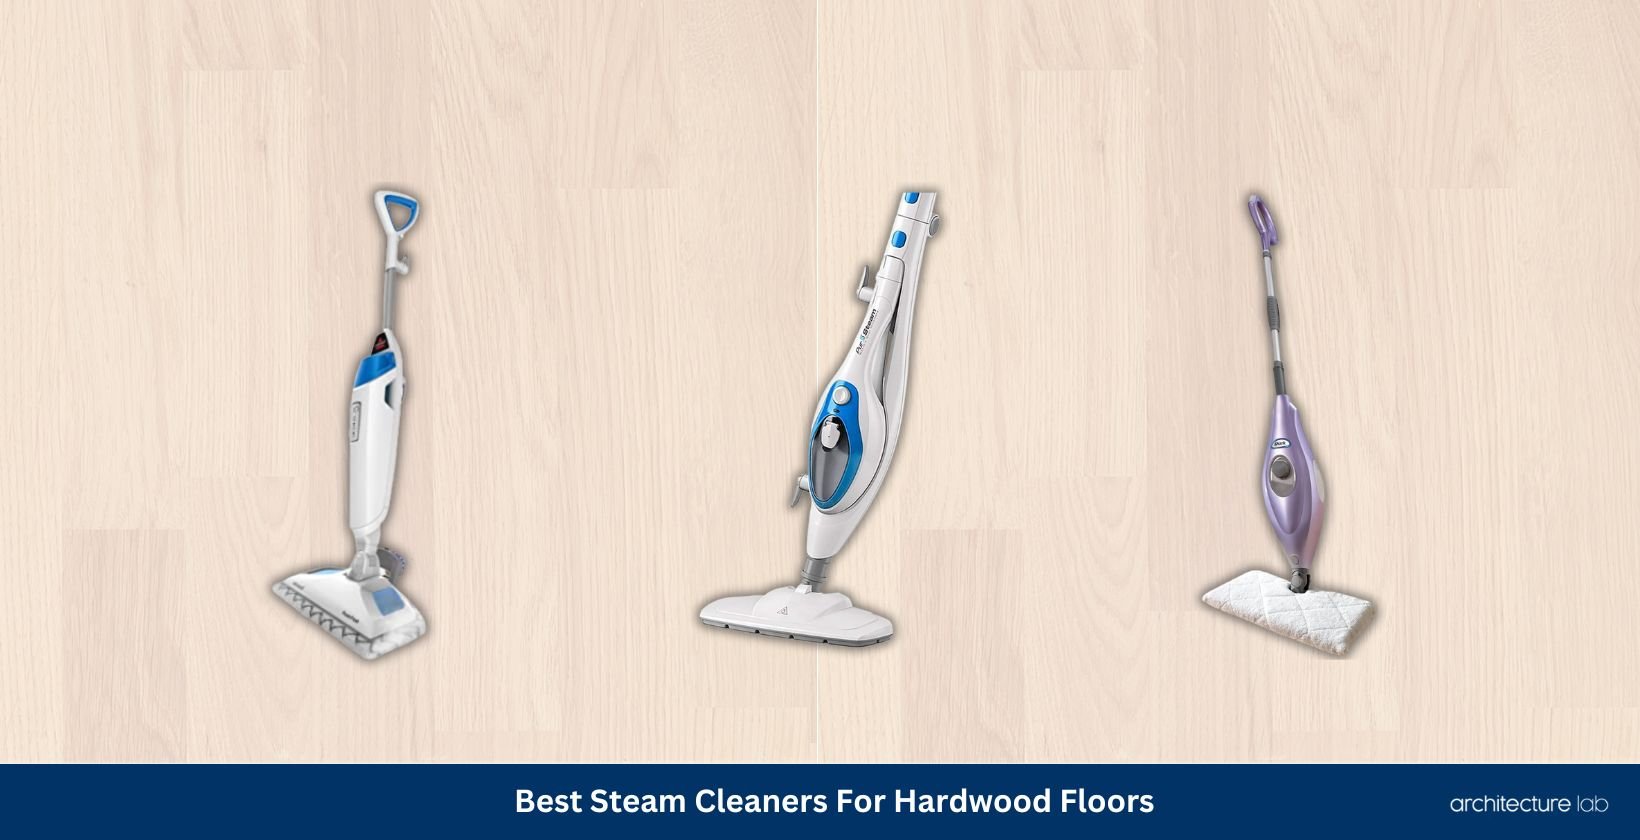 9 Best Steam Cleaners For Hardwood Floors [Reviewed]